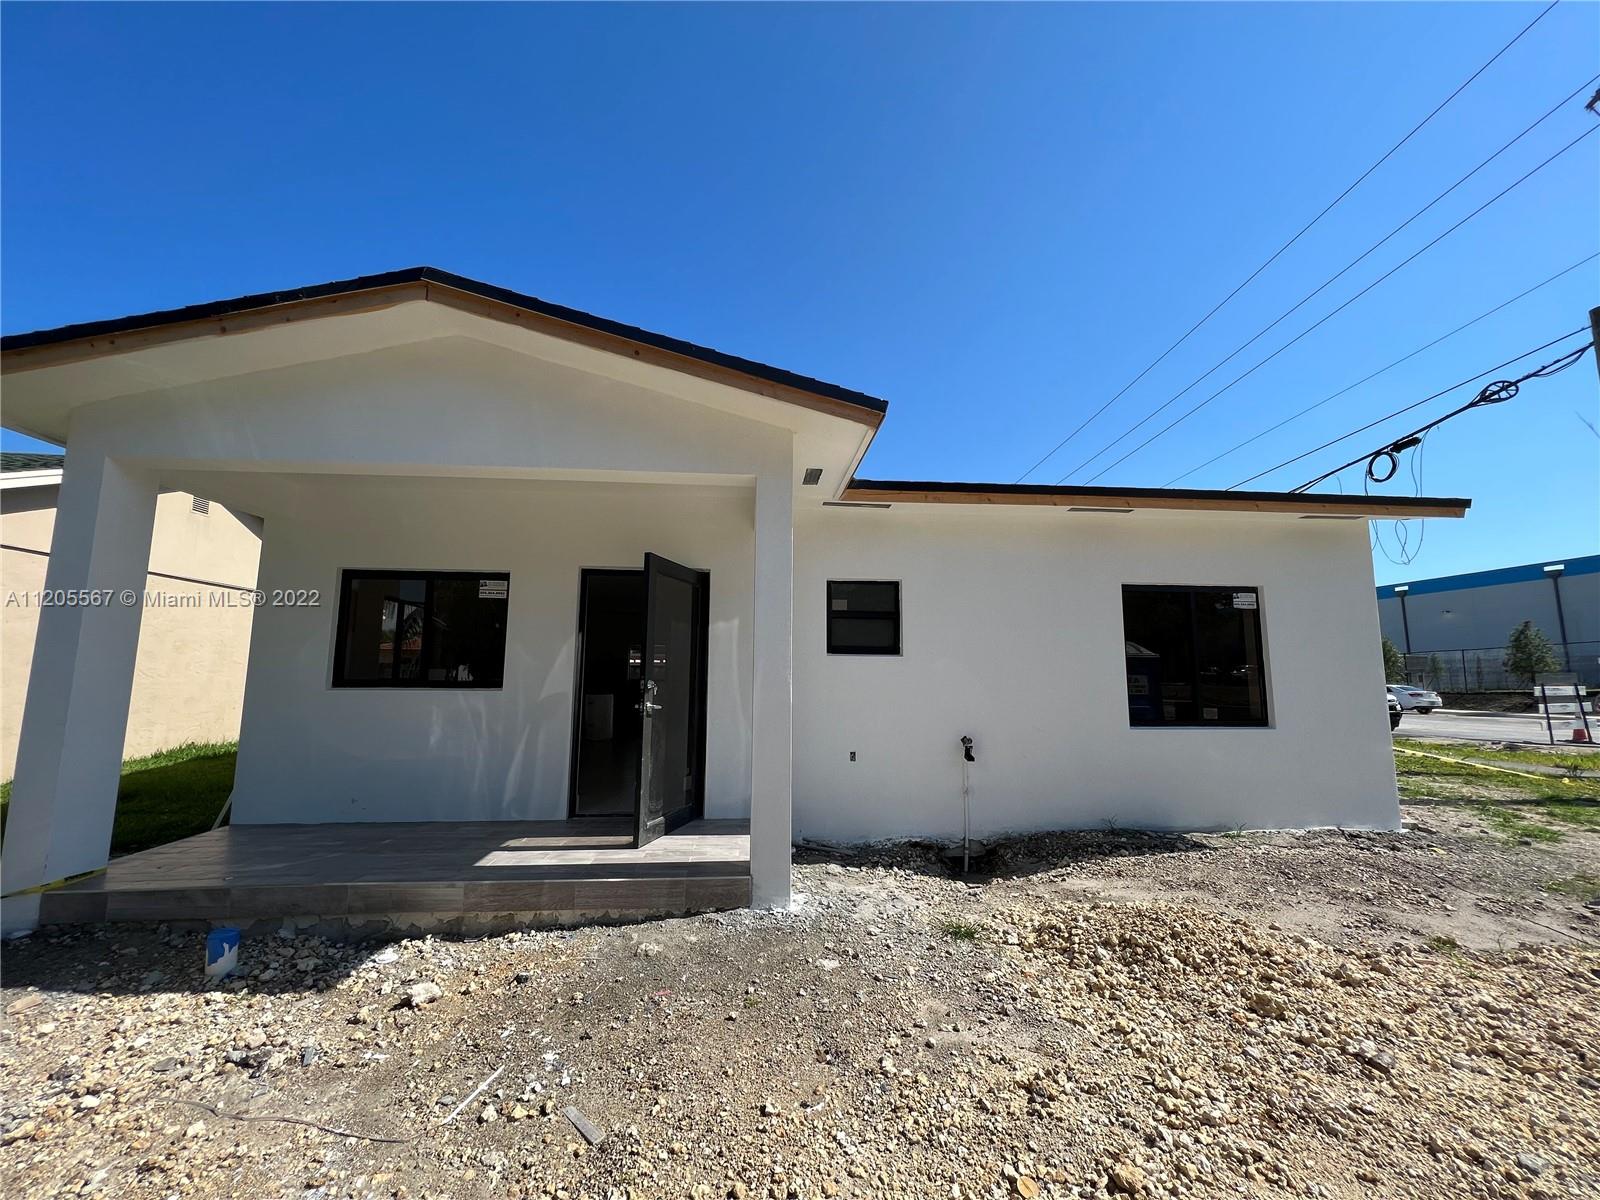 NEW CONSTRUCTION 2022!!! GREAT HOME ON A QUITE STREET WITH NO HOA.THIS HOME HAS 3 BEDROOMS 2 BATHROOMS